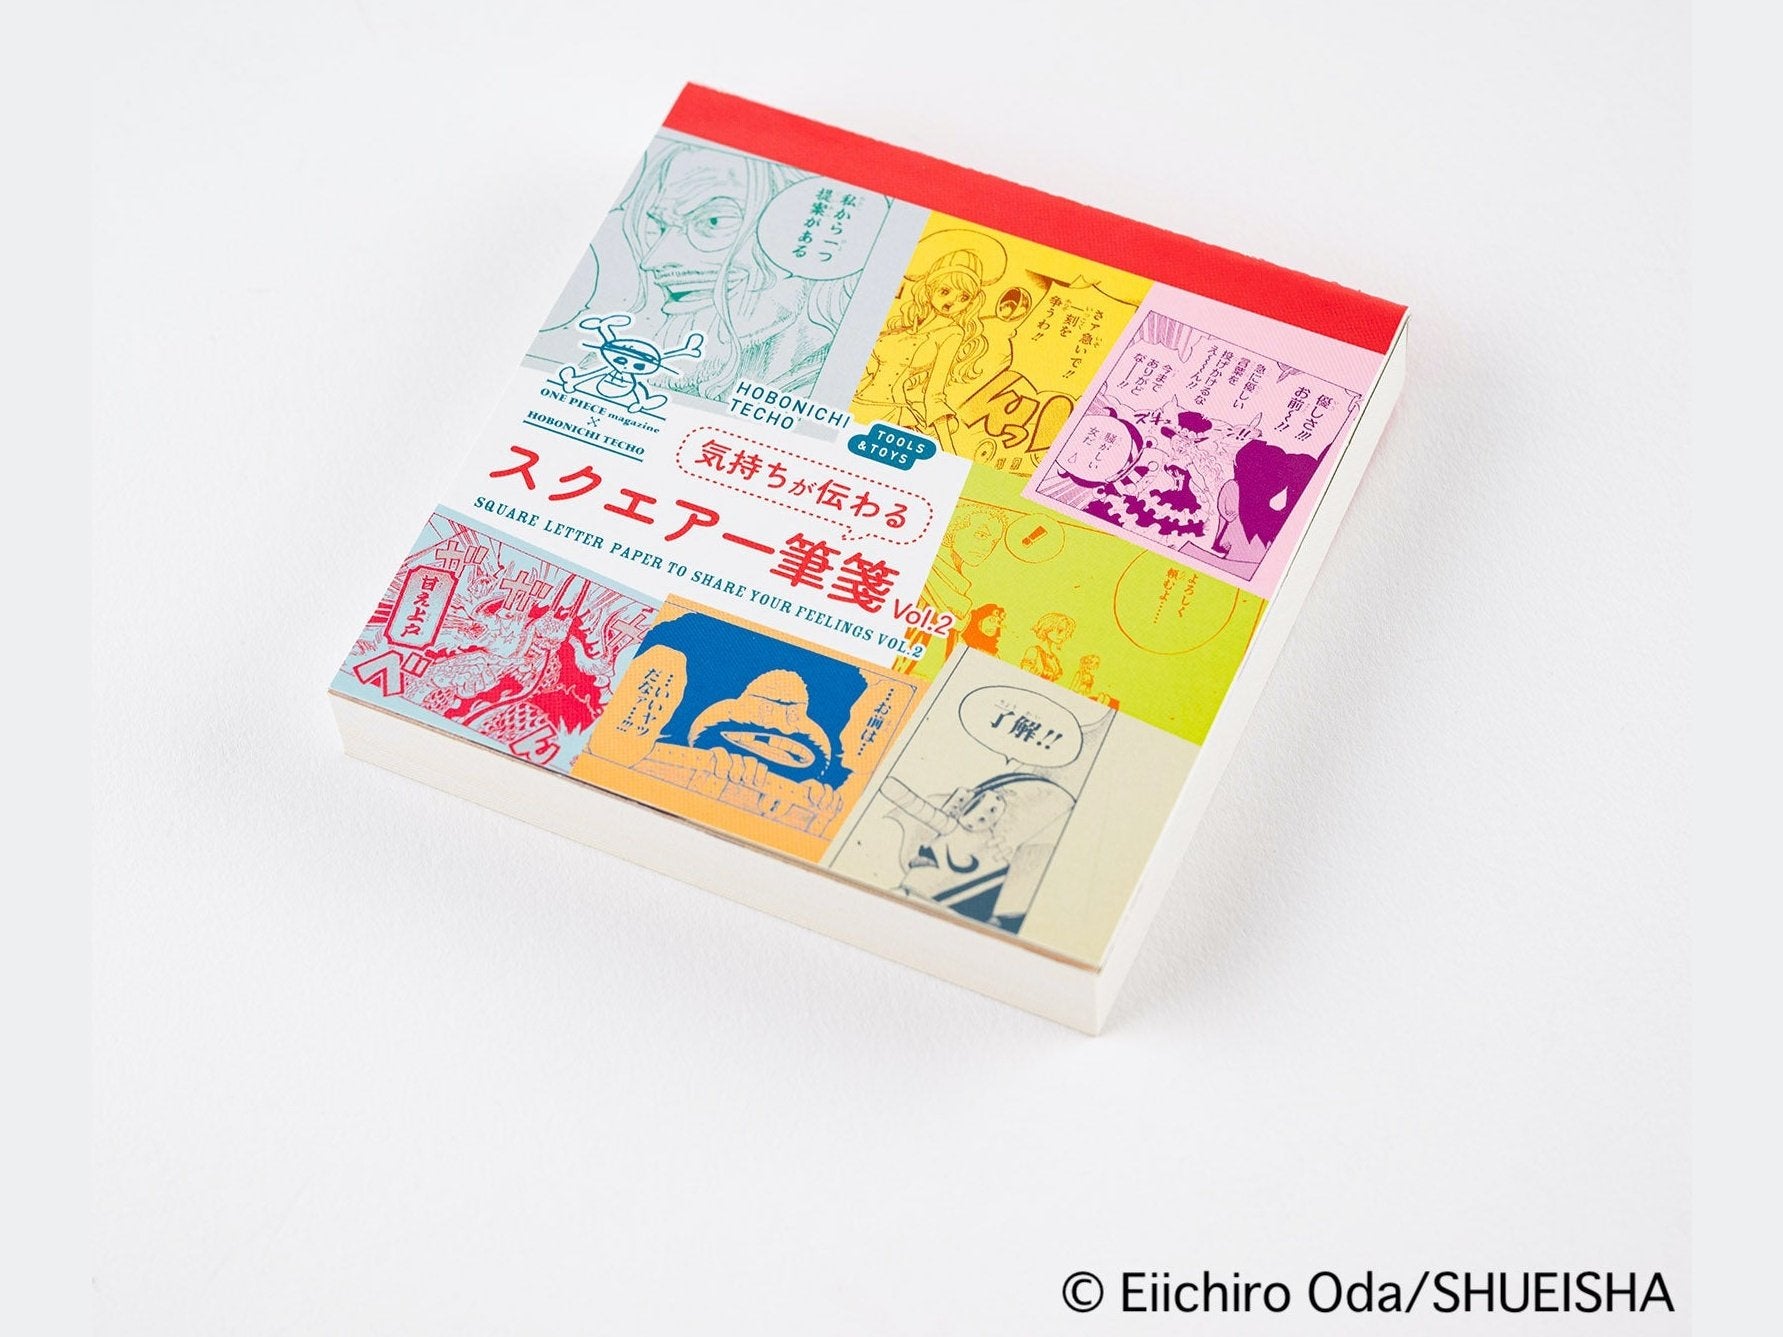 Hobonichi Techo ONE PIECE magazine: Square Letter Paper to Share Your Feelings Vol. 2